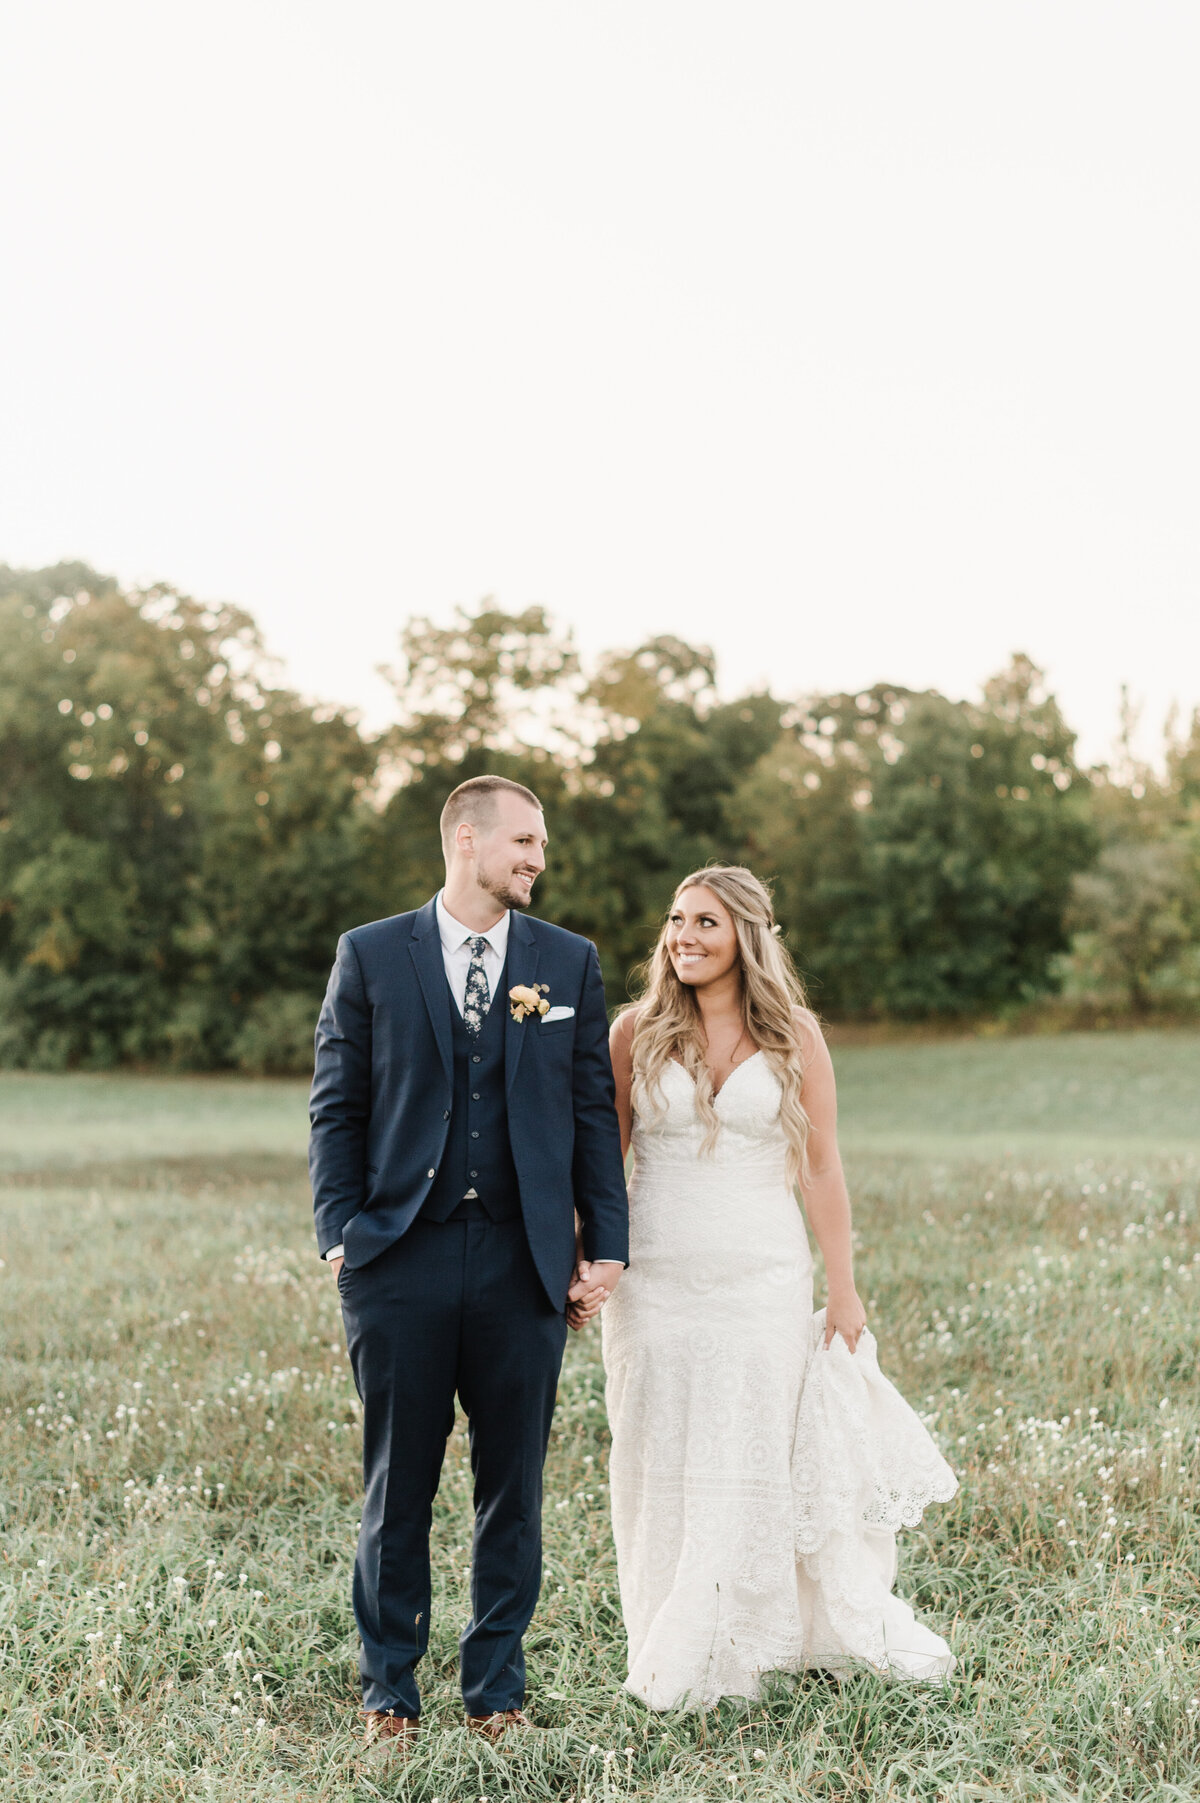 Sarah & Mike, September 19 2020 - Annmarie Swift Photography-363